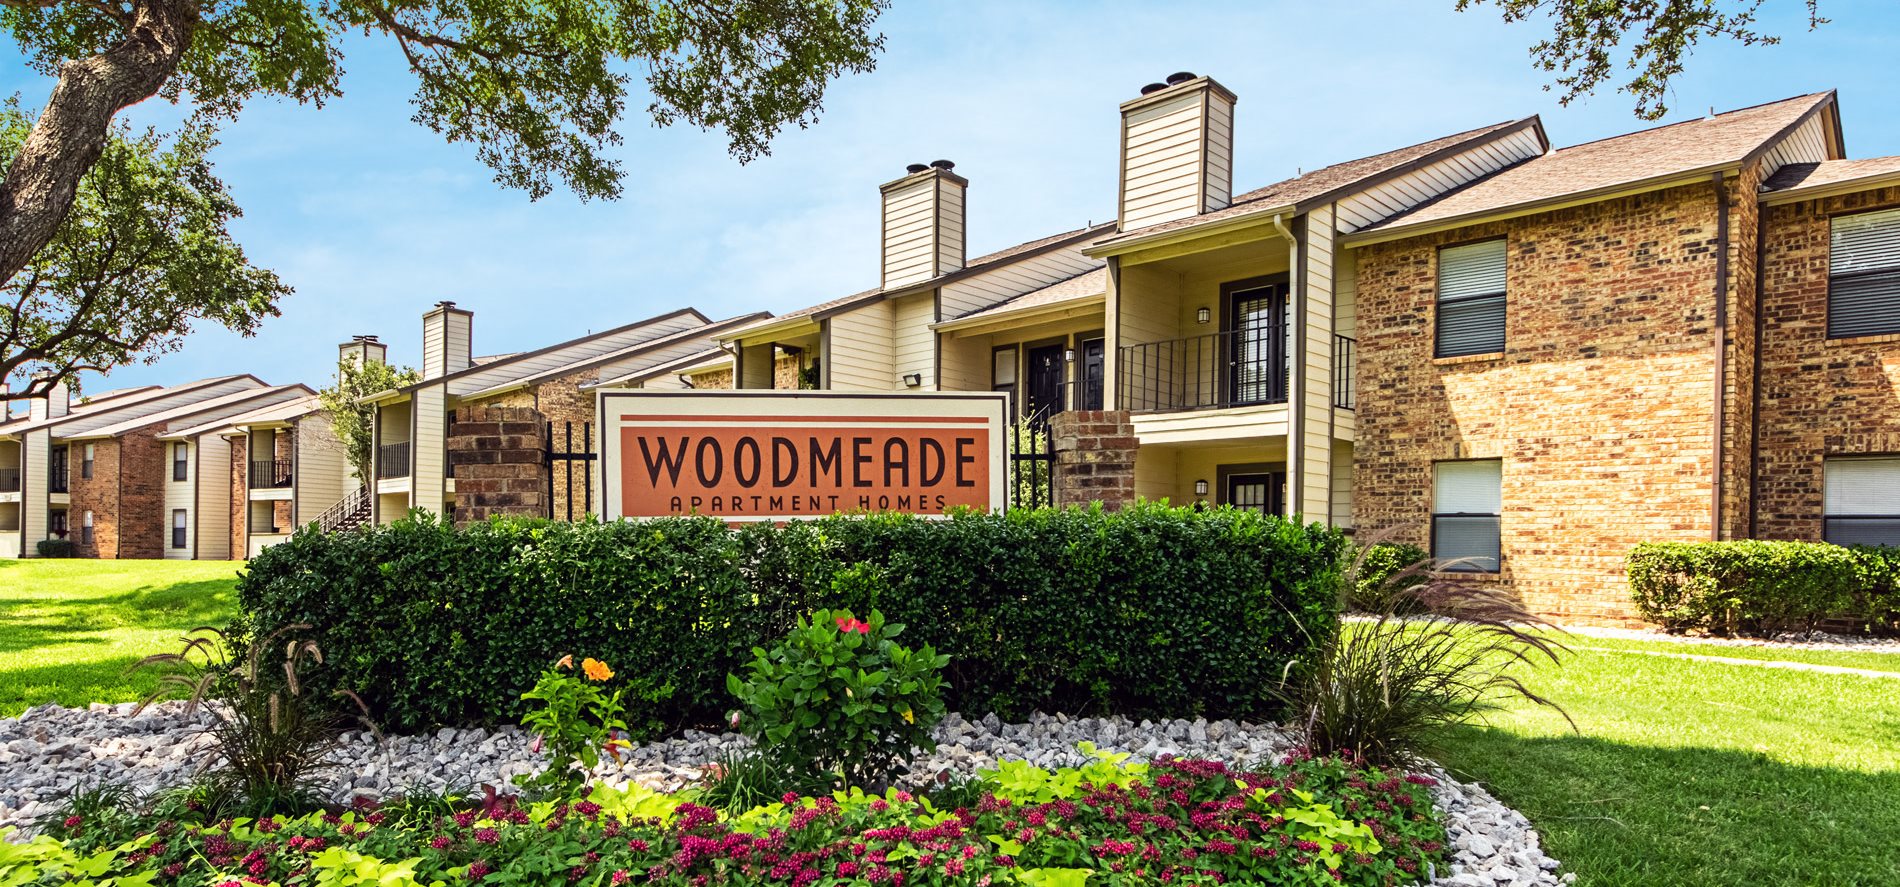 Woodmeade Apartments In Irving Tx